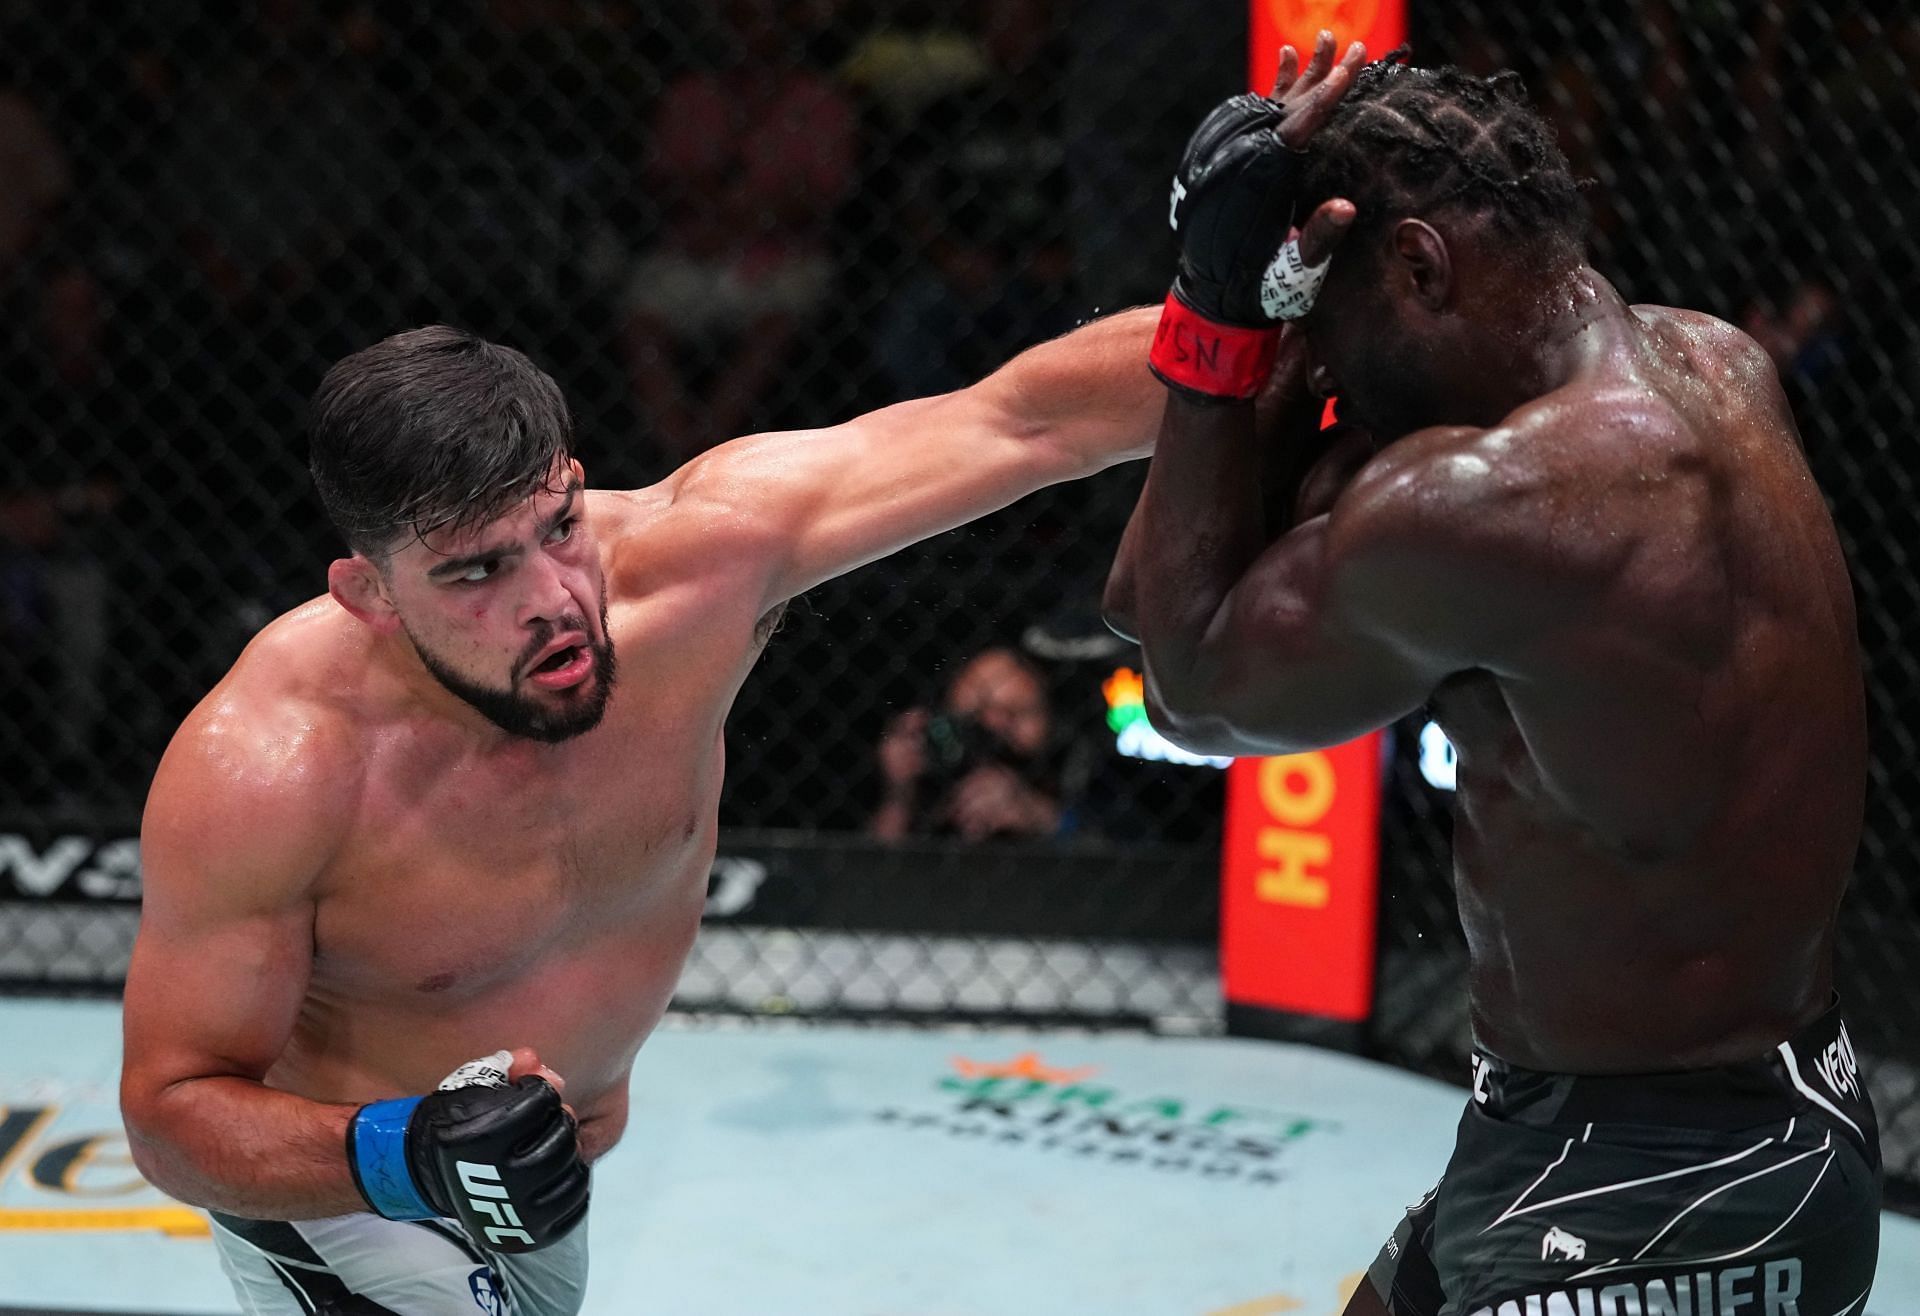 Kelvin Gastelum has simply not reached his potential in the UFC